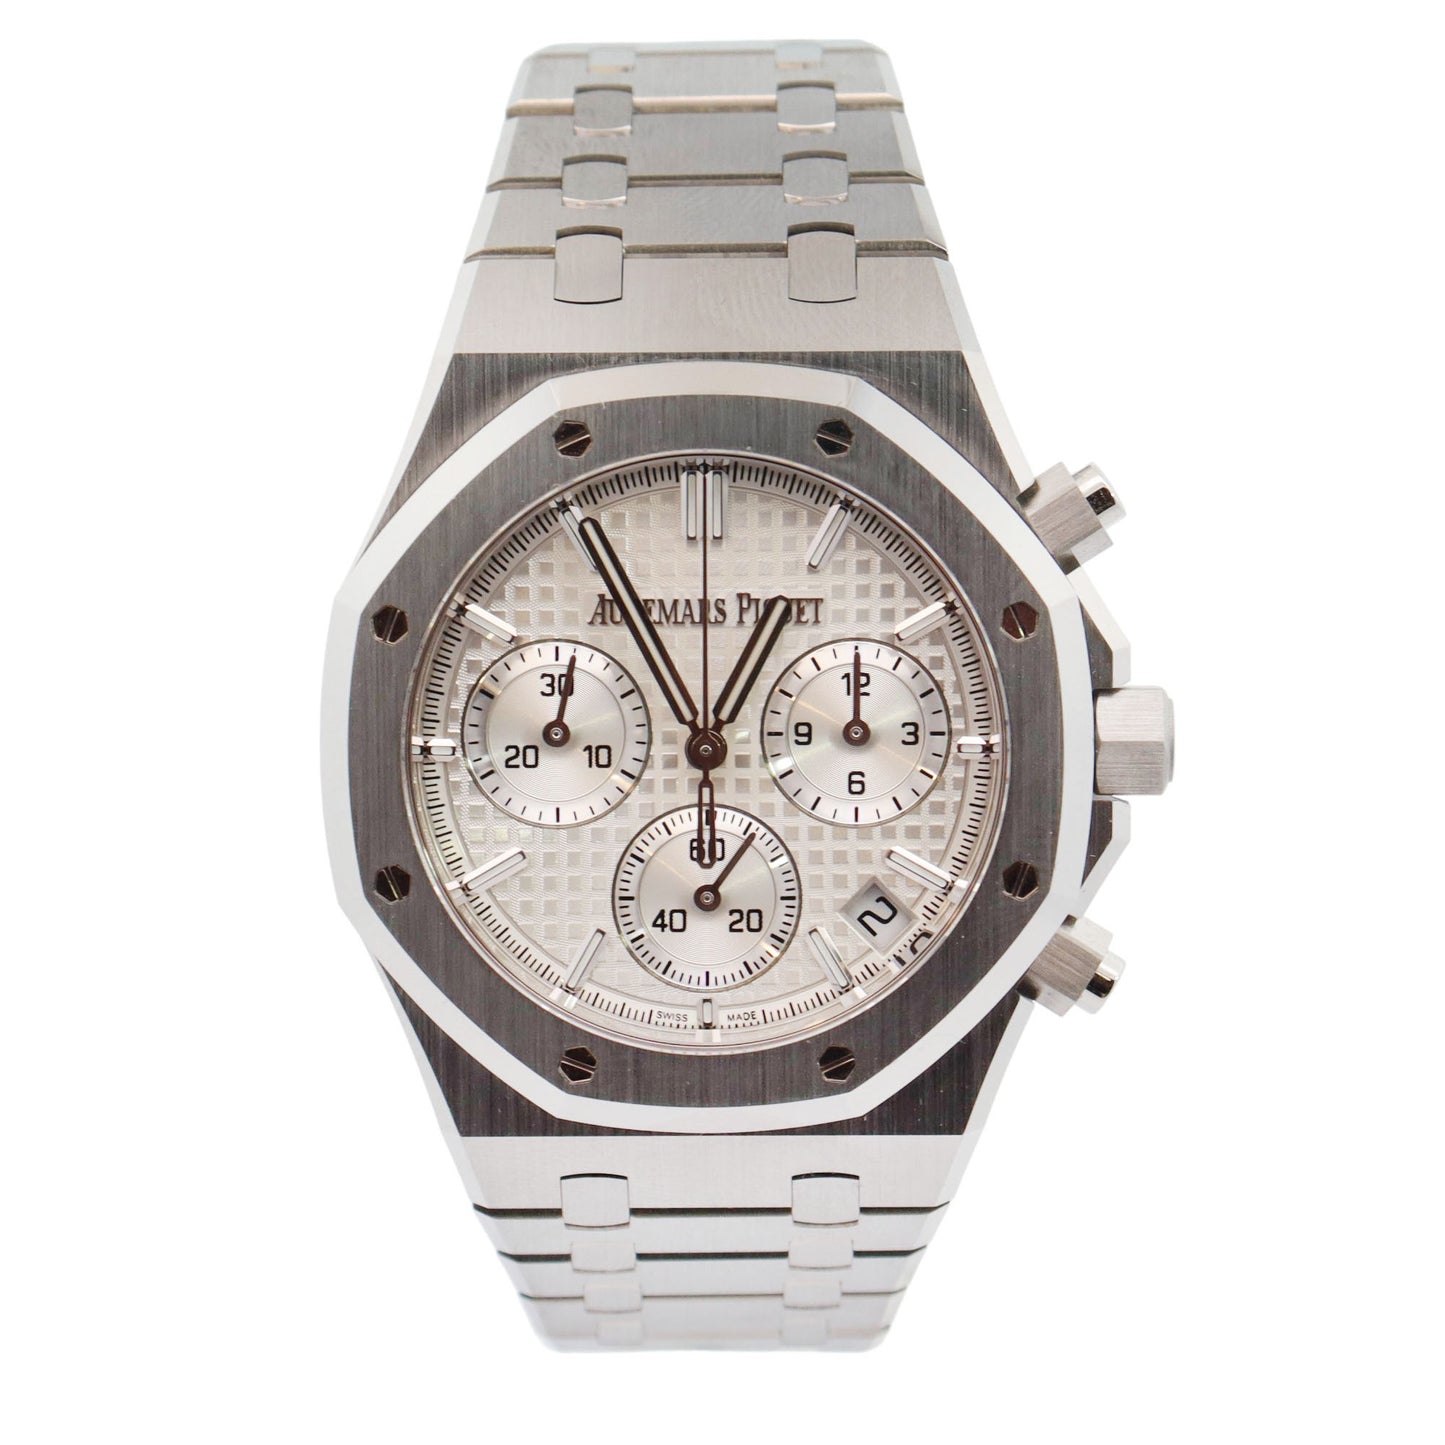 Audemars Piguet Royal Oak Stainless Steel 41mm White Chronograph Dial Watch Reference# 26240ST.OO.1320ST.07